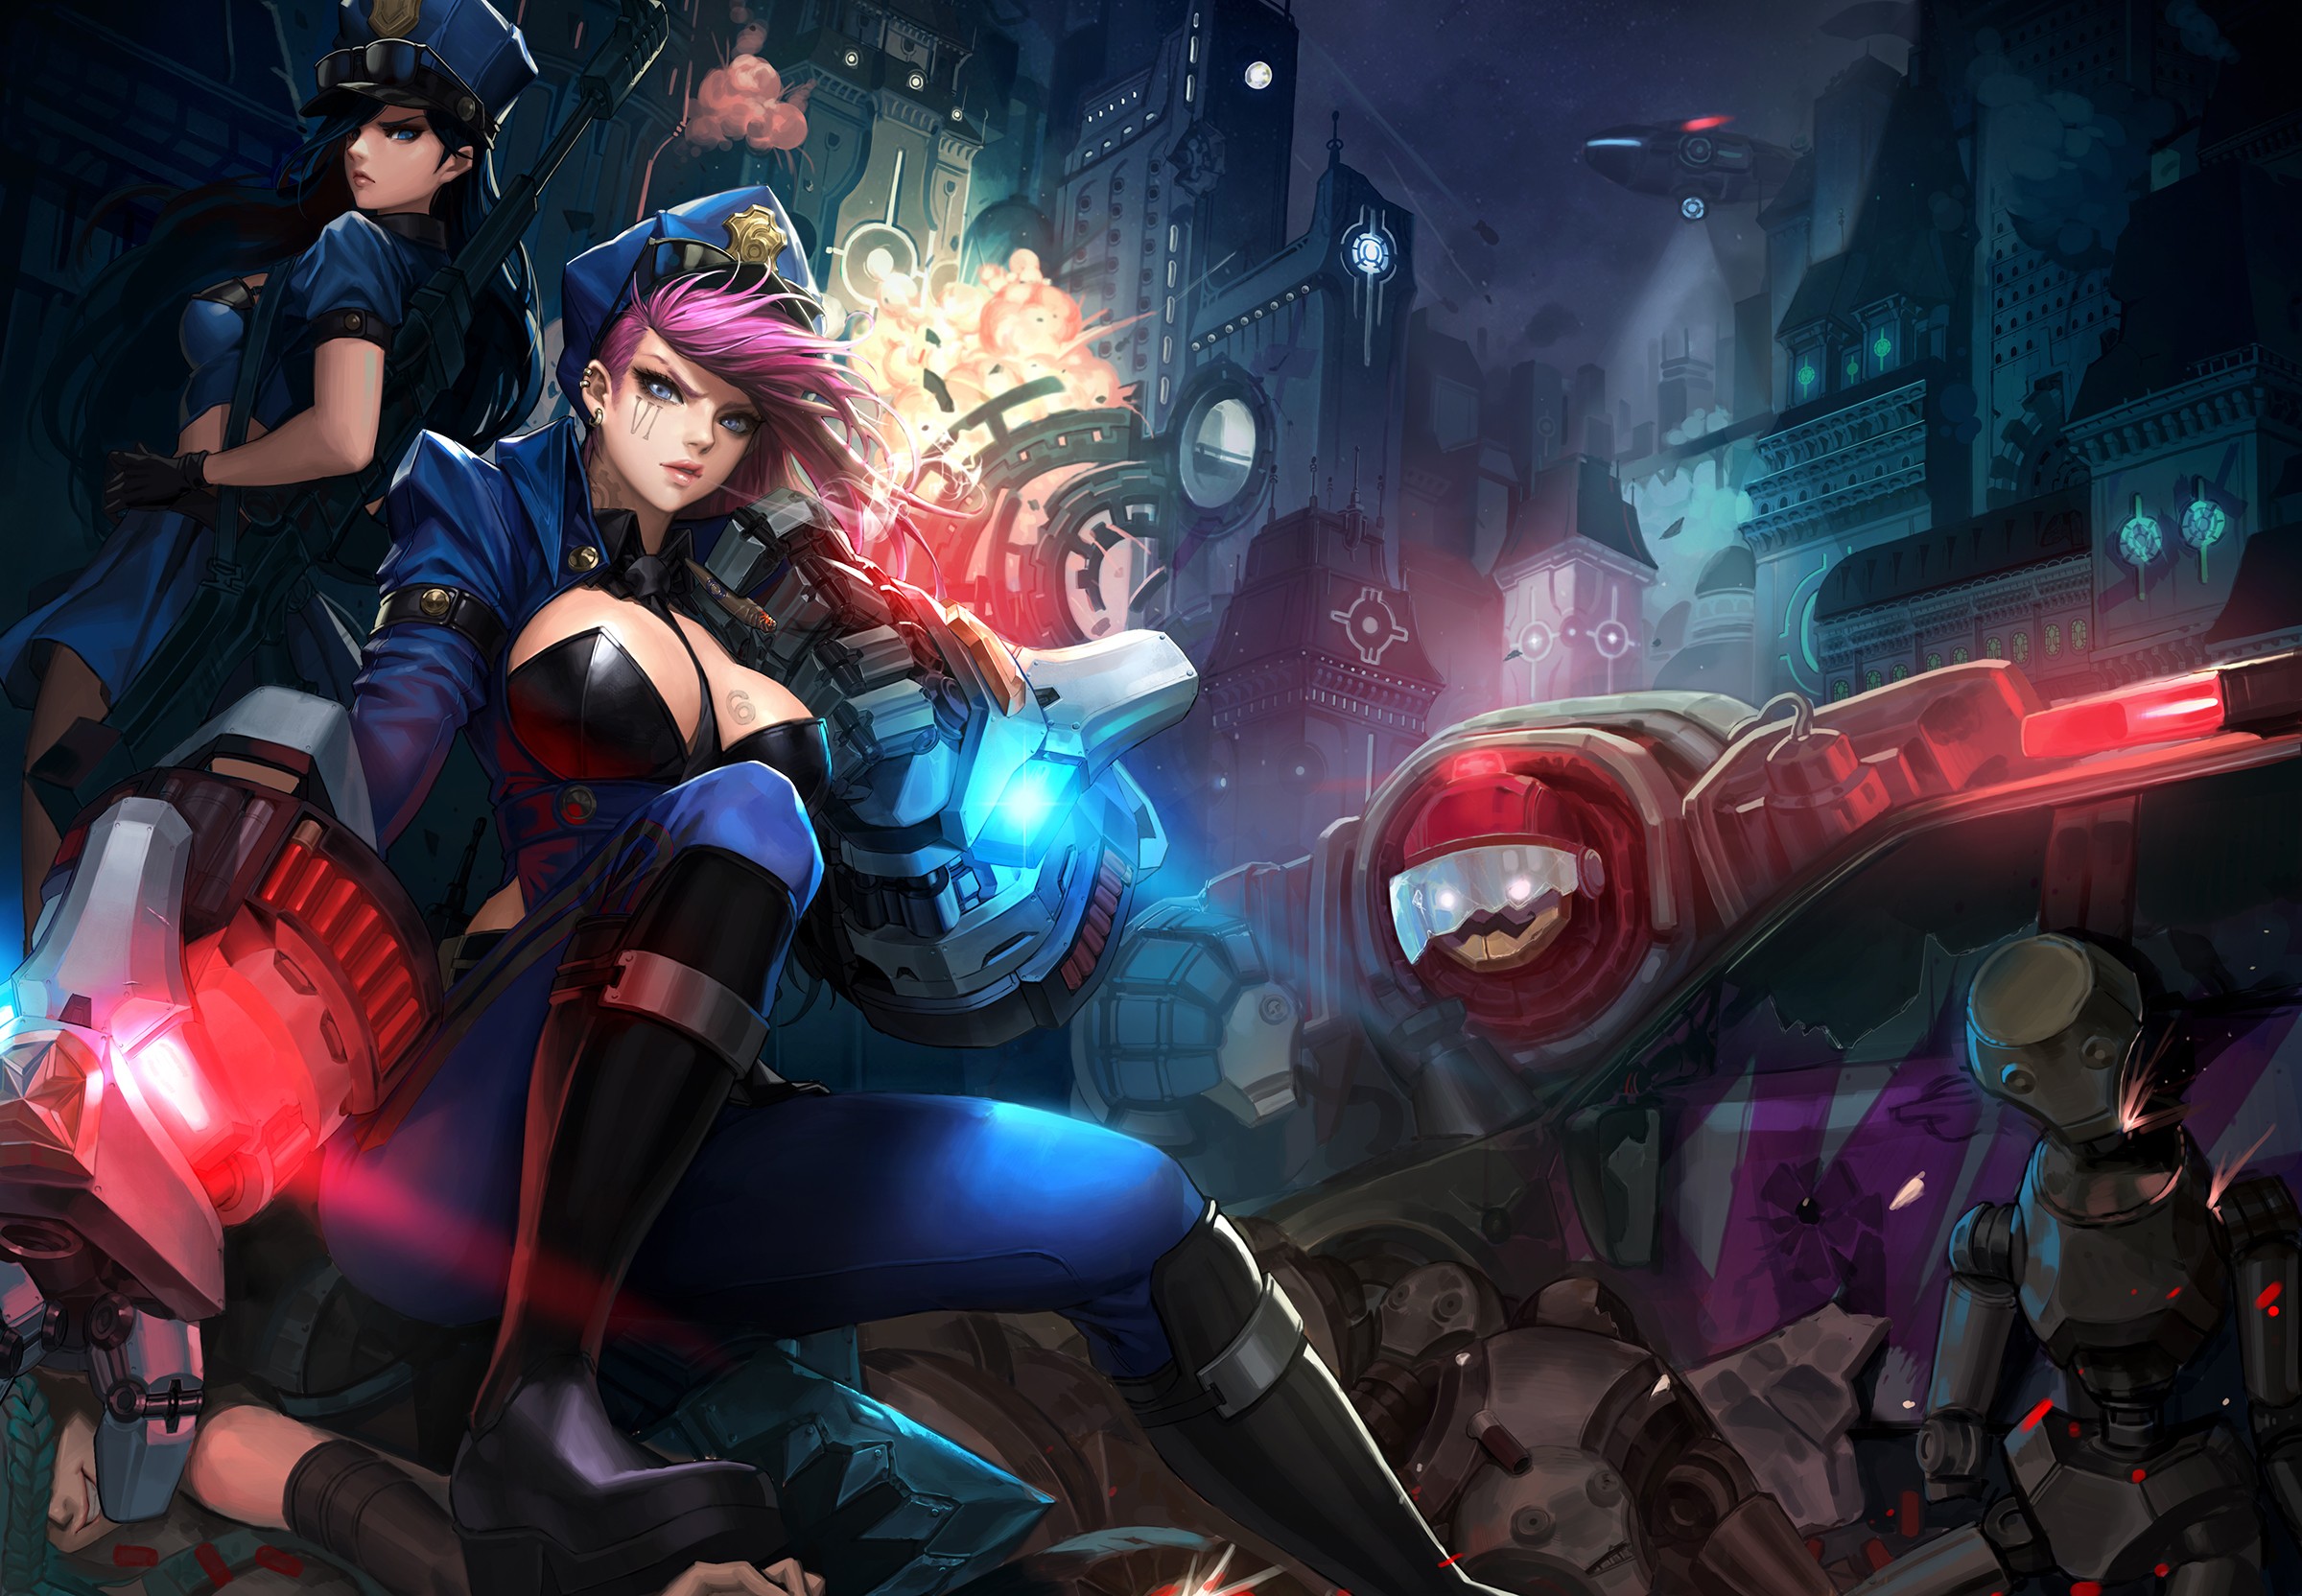 Anime 2400x1664 anime anime girls League of Legends Vi (League of Legends) boobs big boobs ArtStation two women police women video game art video game girls PC gaming Caitlyn (League of Legends) curvy police fan art video game characters